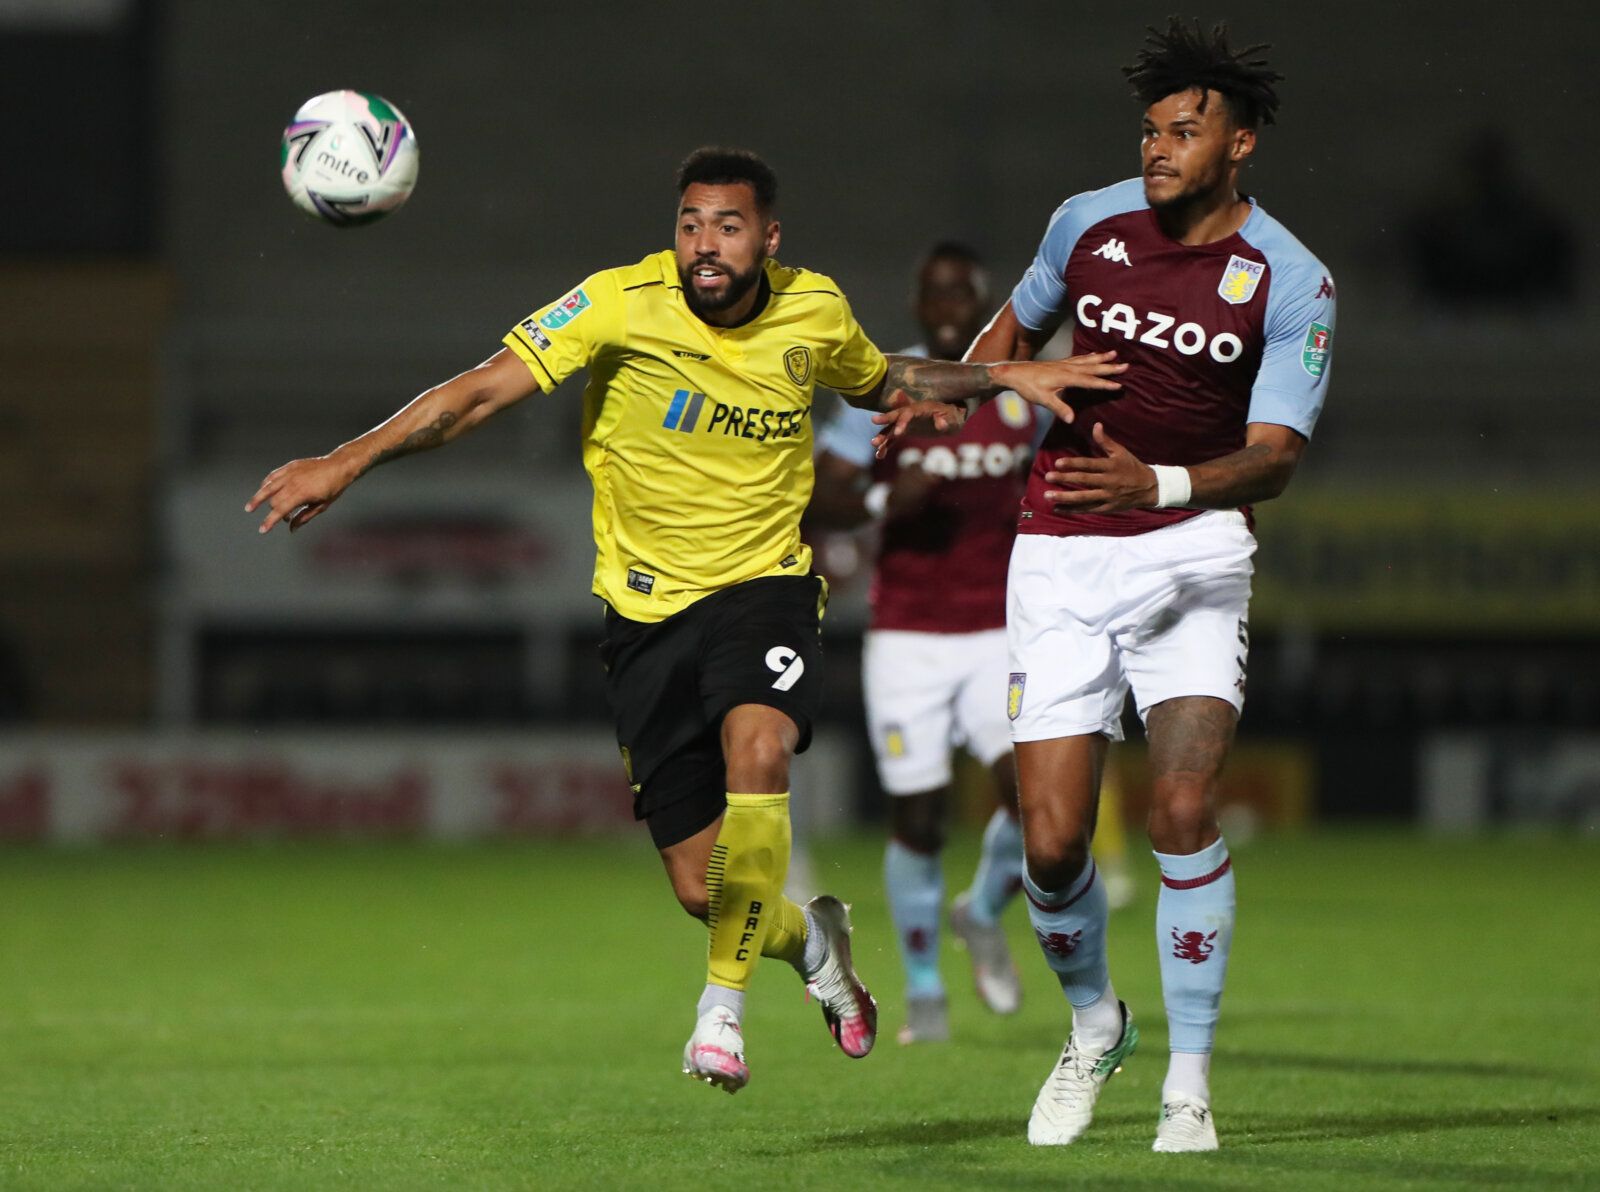 Soccer Football - Carabao Cup Second Round - Burton Albion v Aston Villa - Pirelli Stadium, Burton-on-Trent, Britain - September 15, 2020 Burton Albion's Kane Hemmings in action with Aston Villa's Tyrone Mings Pool via REUTERS/Mike Egerton EDITORIAL USE ONLY. No use with unauthorized audio, video, data, fixture lists, club/league logos or 'live' services. Online in-match use limited to 75 images, no video emulation. No use in betting, games or single club/league/player publications.  Please cont